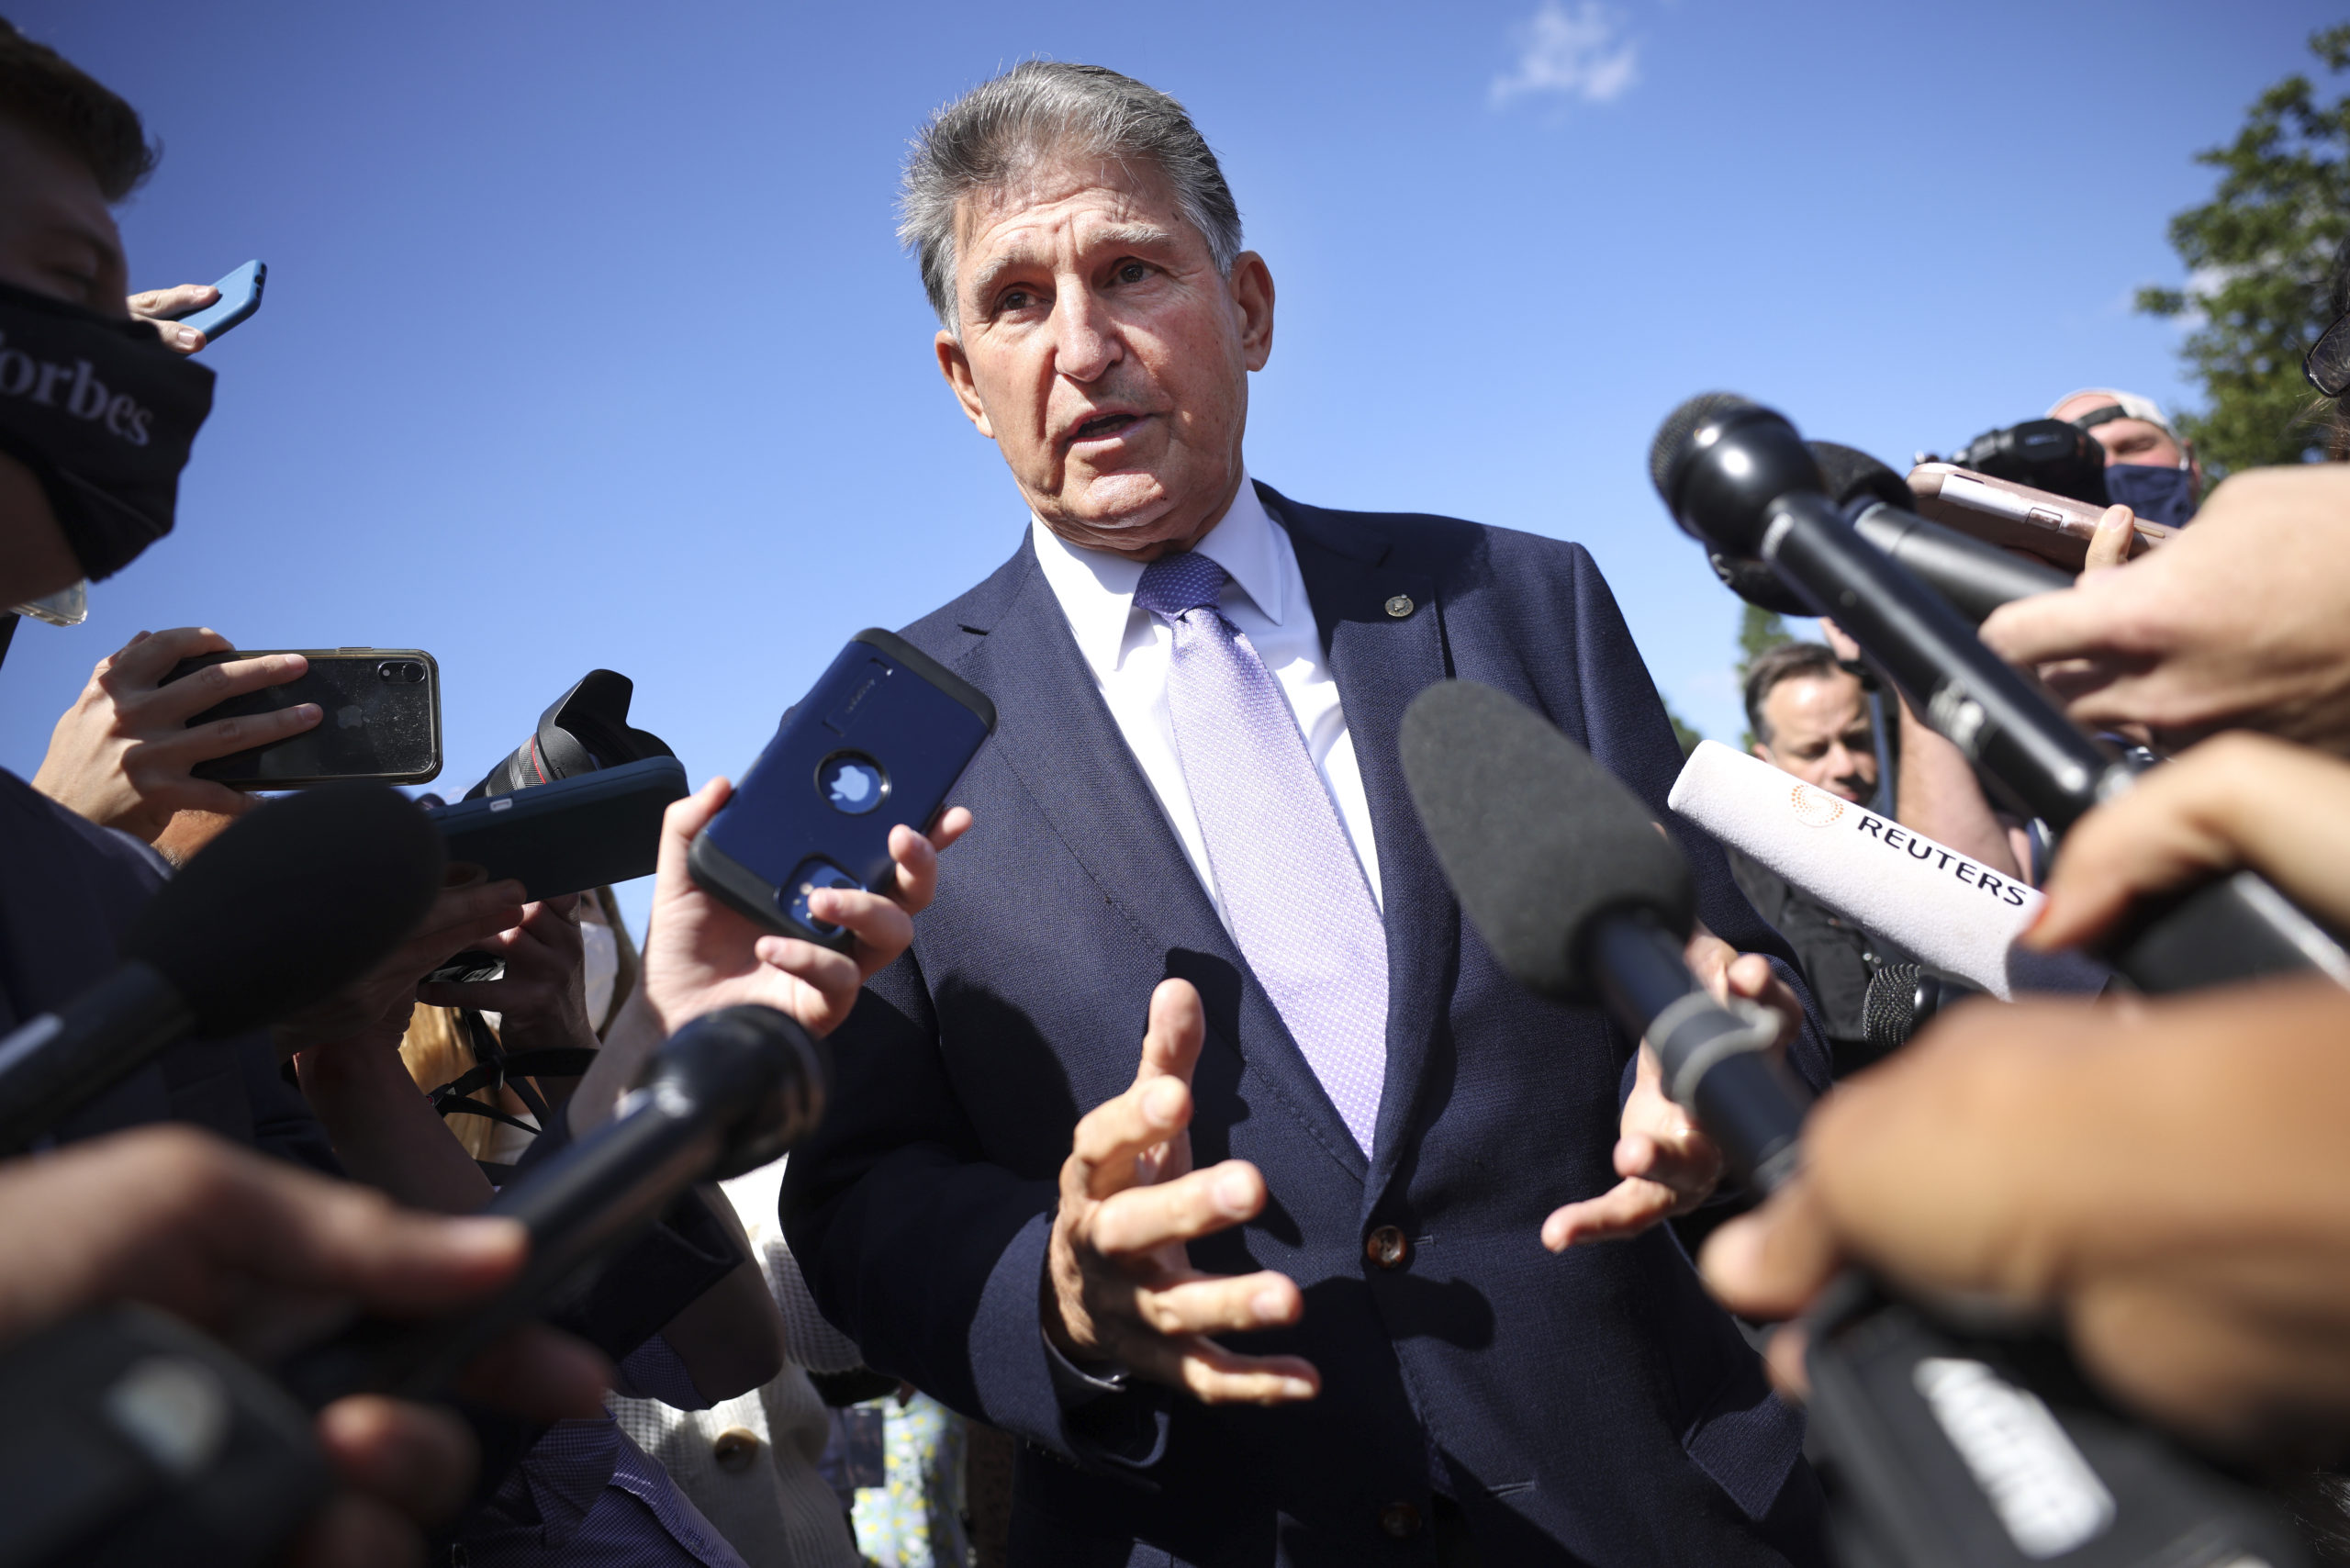 Sen. Joe Manchin speaks to reporters outside of the Capitol on Thursday. (Kevin Dietsch/Getty Images)